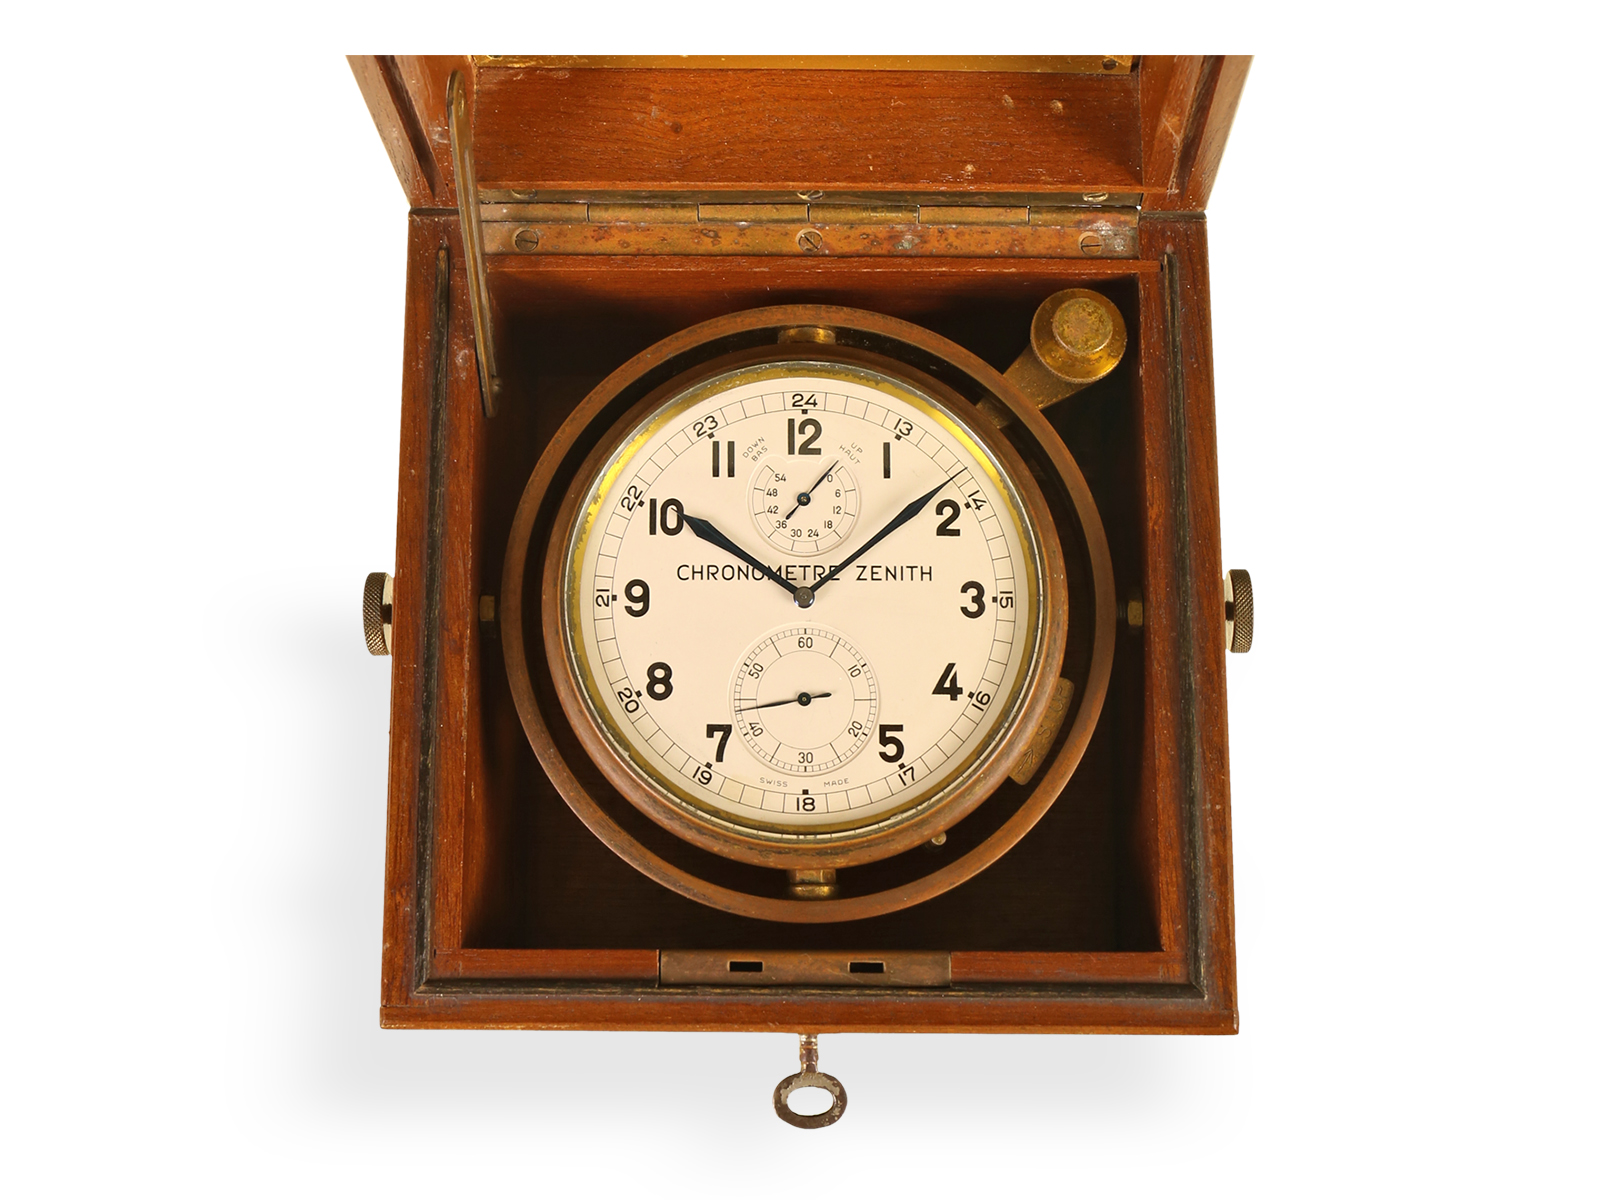 Excellently preserved Zenith marine chronometer, 1930s - Image 2 of 7